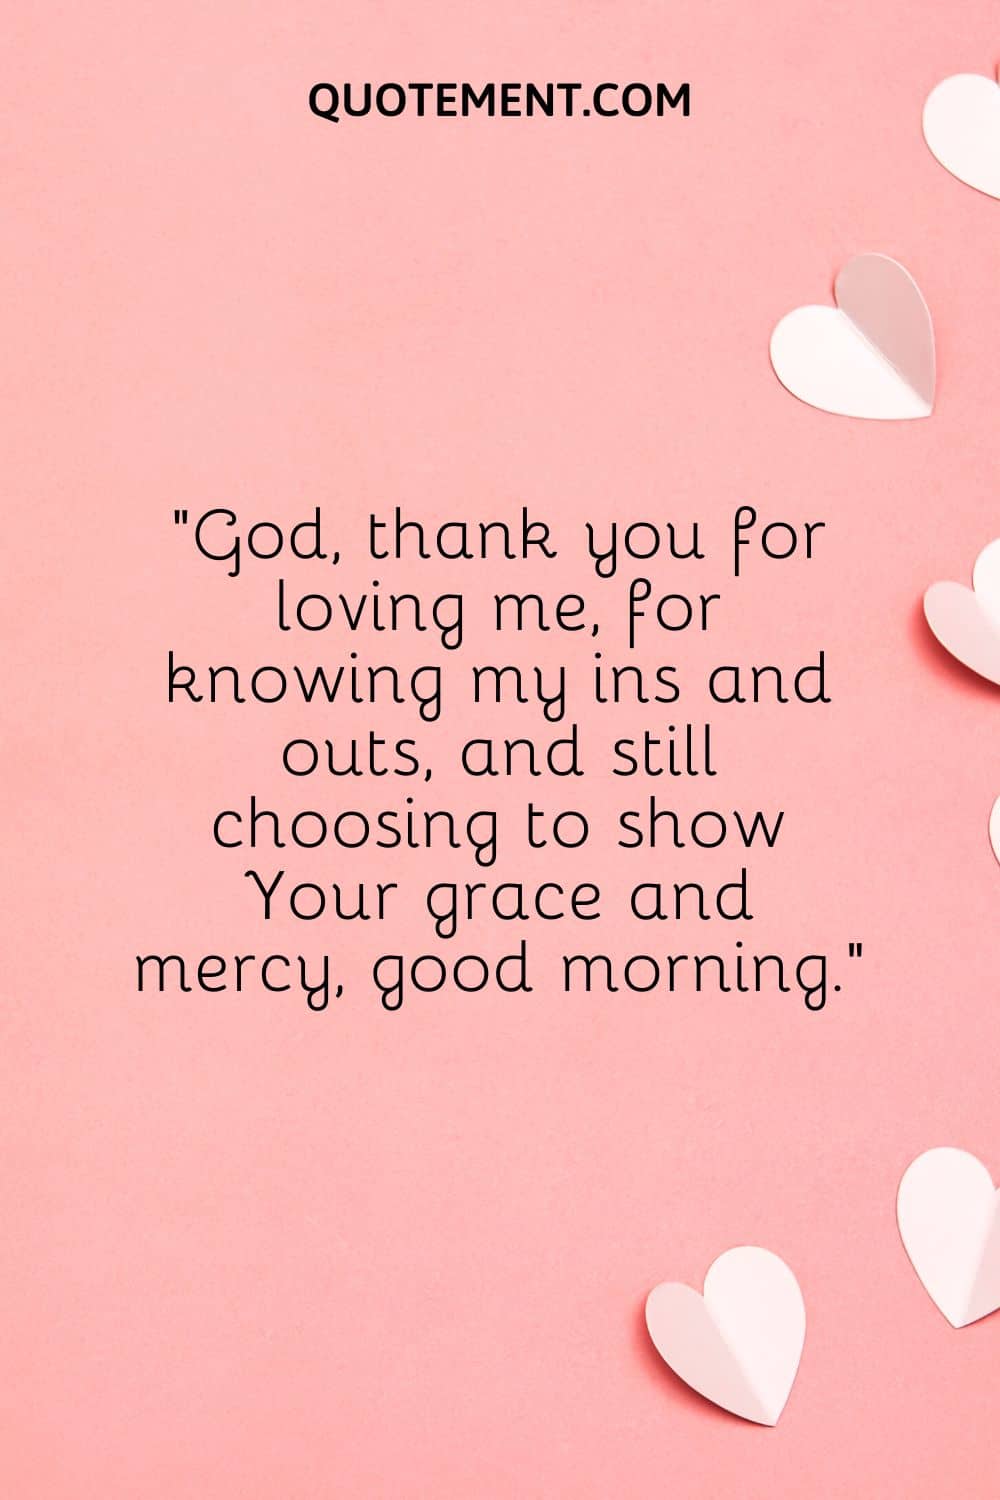 God, thank you for loving me, for knowing my ins and outs, and still choosing to show Your grace and mercy, good morning